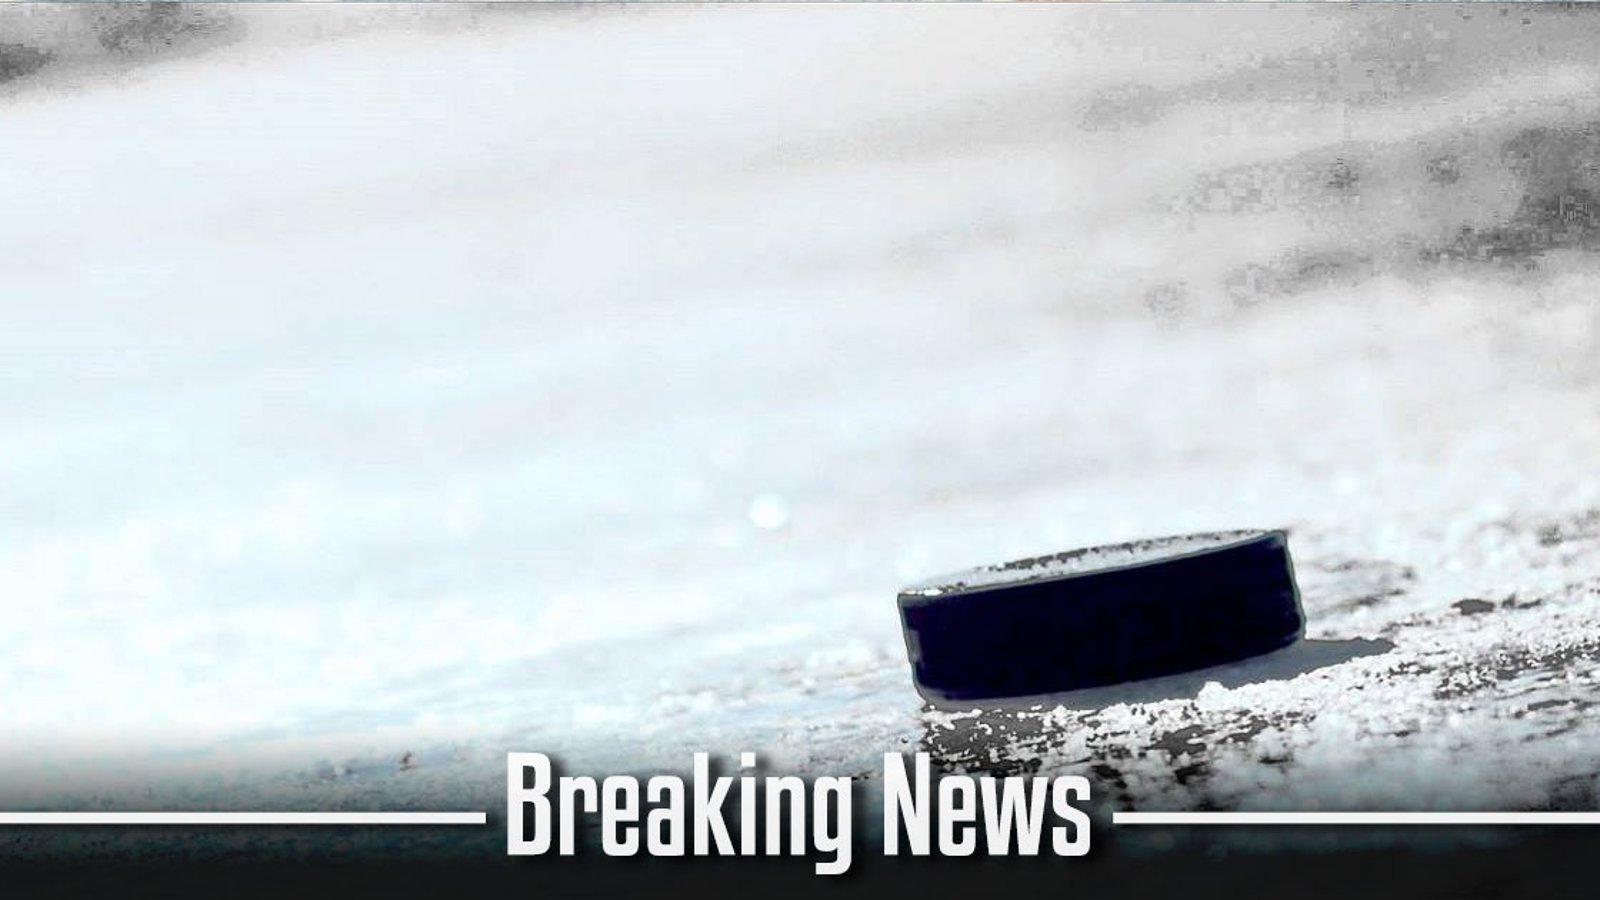 BREAKING NEWS: 12-year-old girl dies after being hit by hockey puck.